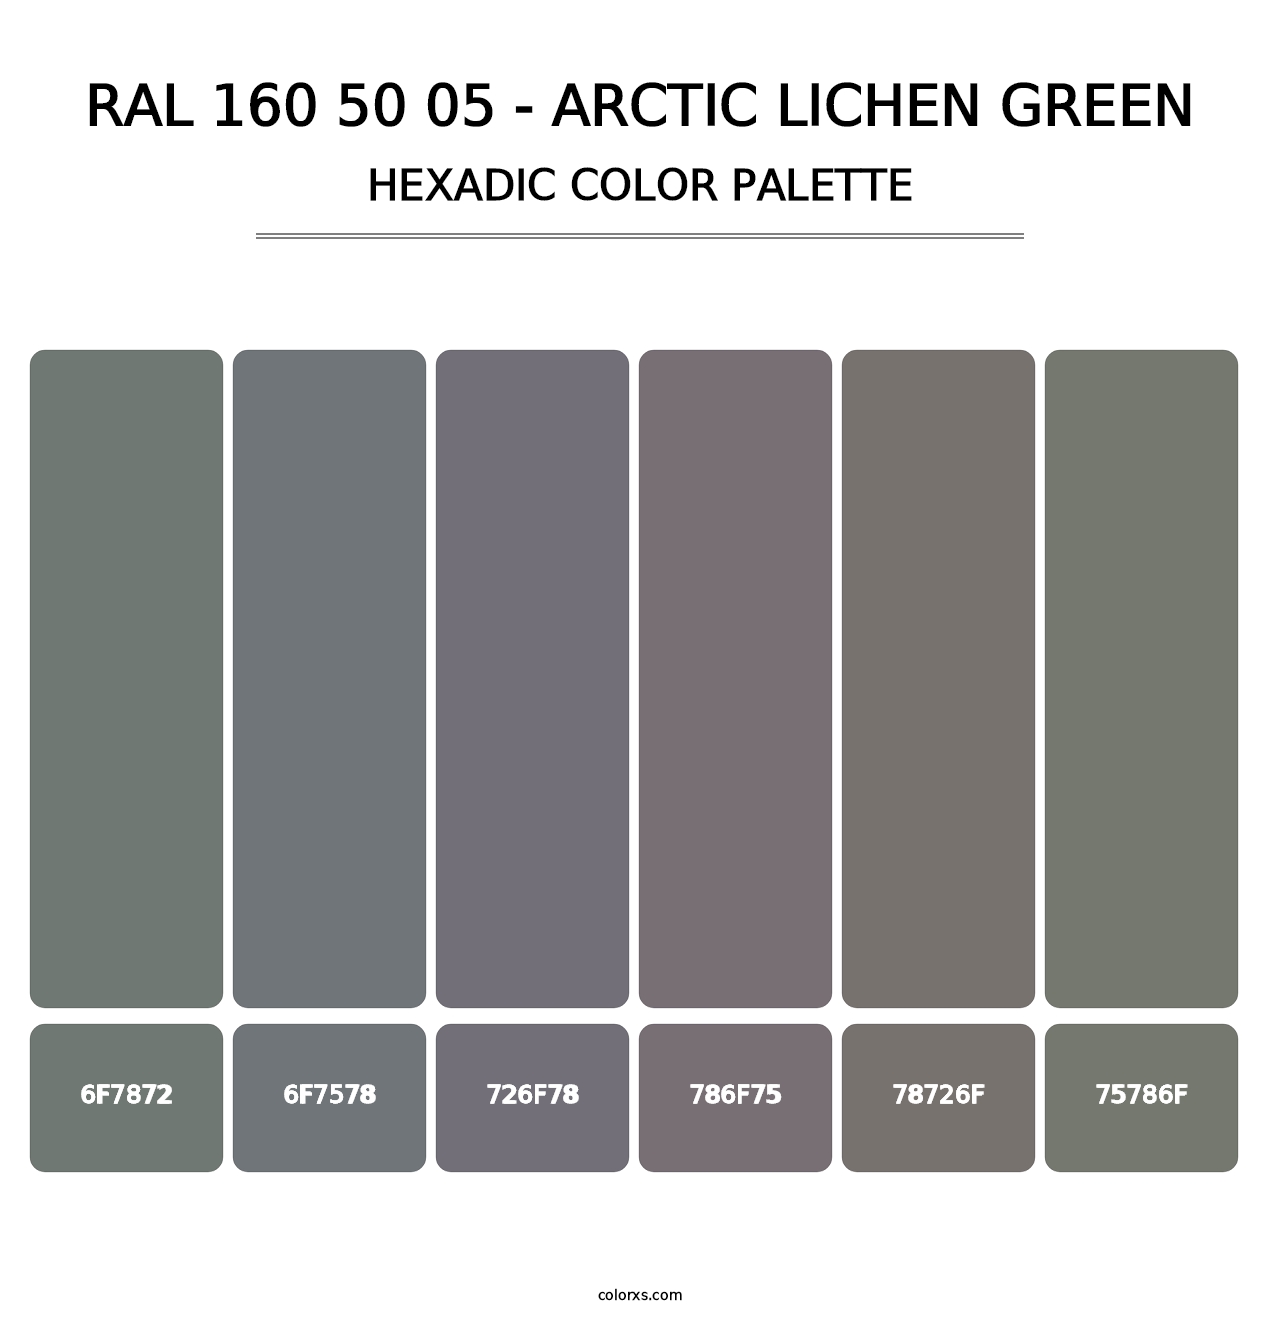 RAL 160 50 05 - Arctic Lichen Green - Hexadic Color Palette